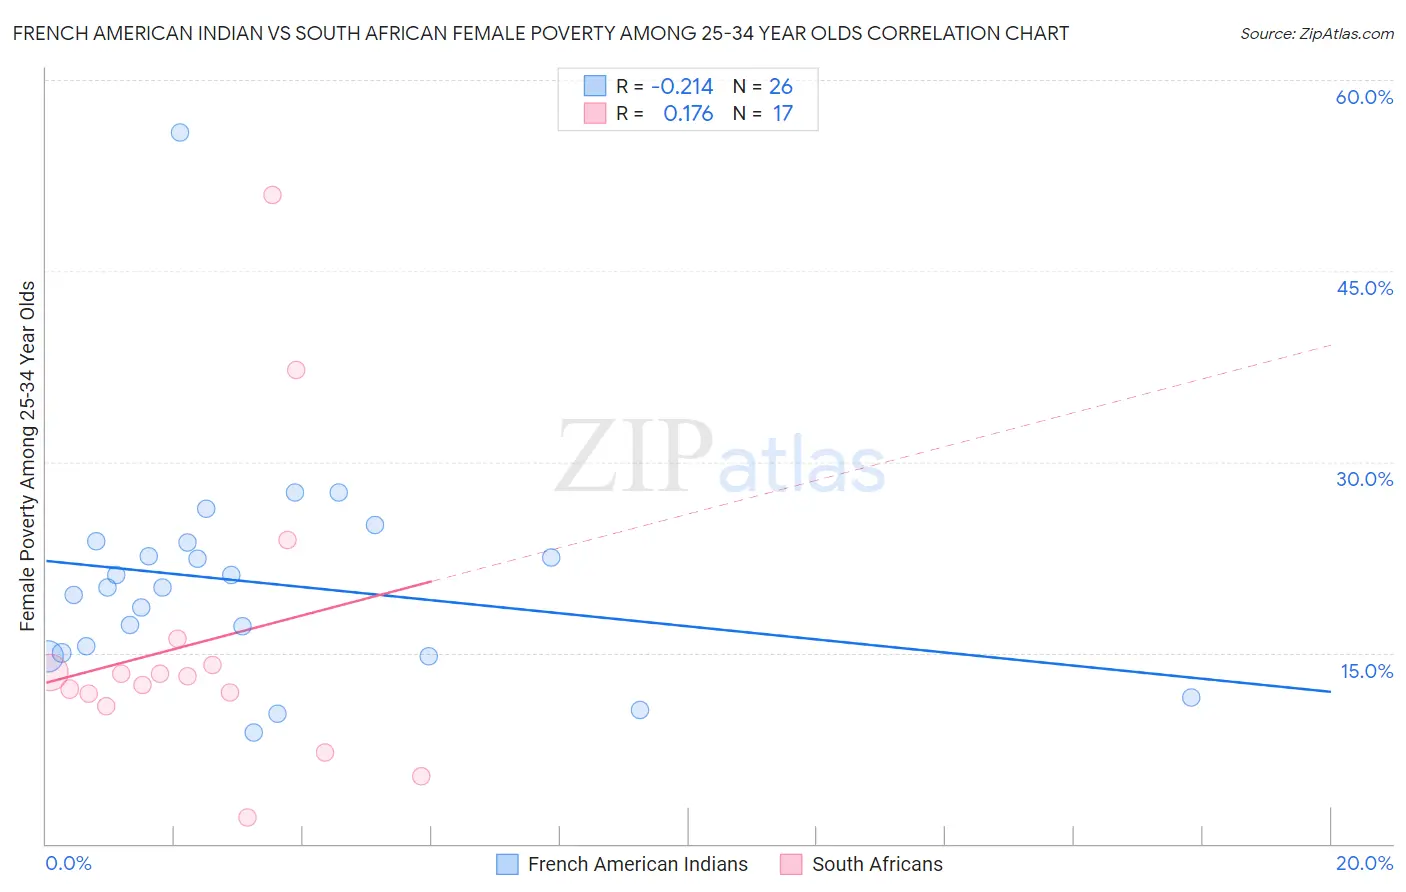 French American Indian vs South African Female Poverty Among 25-34 Year Olds